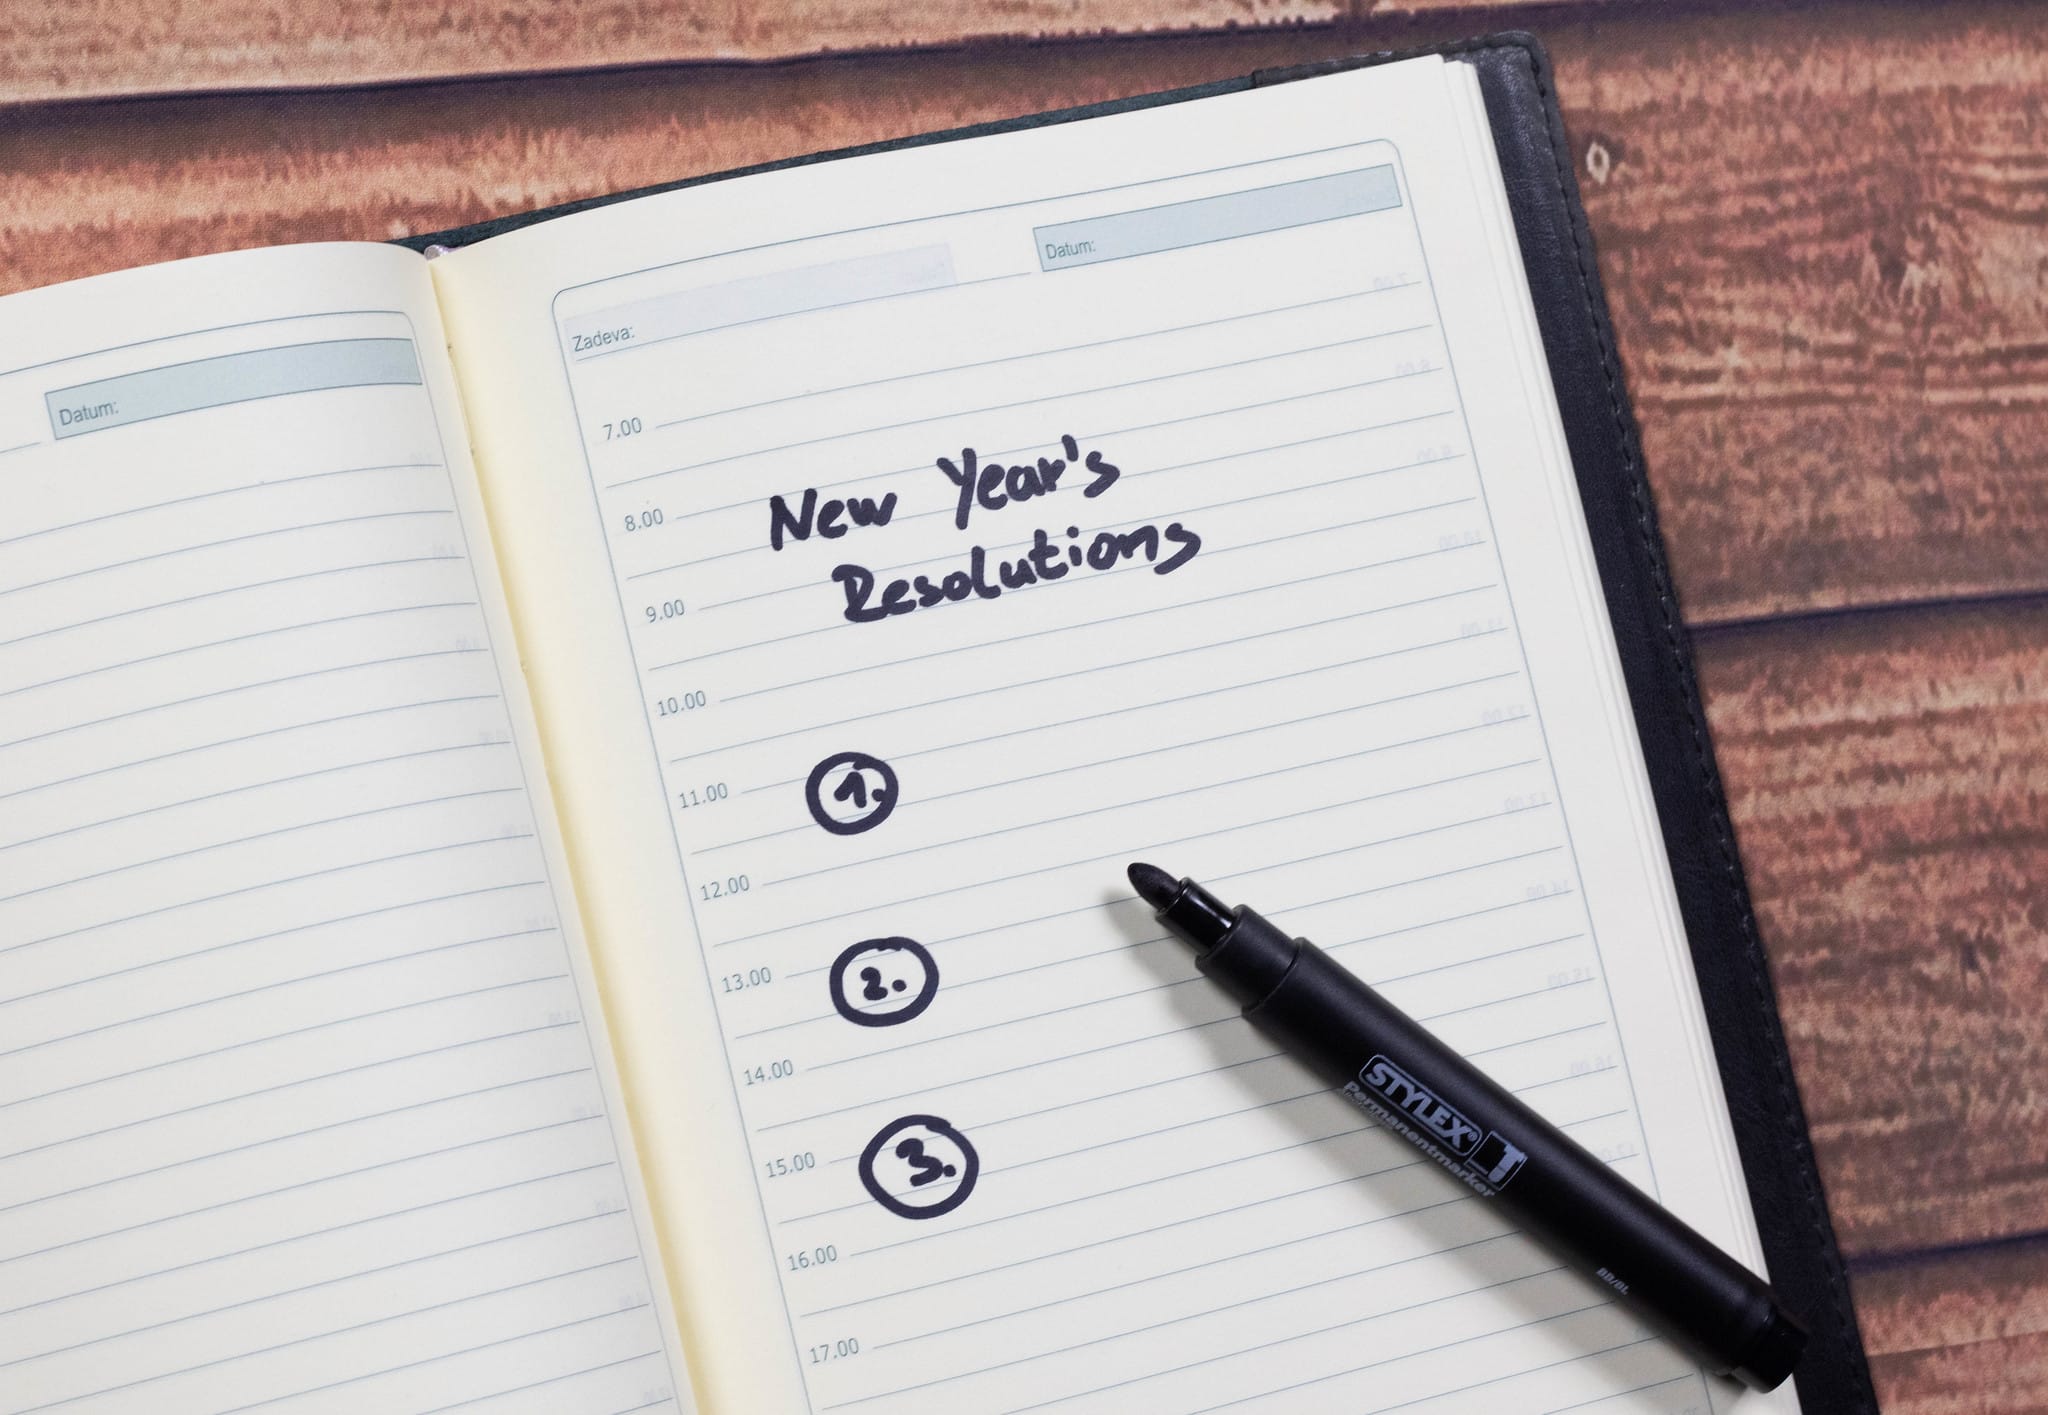 Musical New Year’s Resolutions